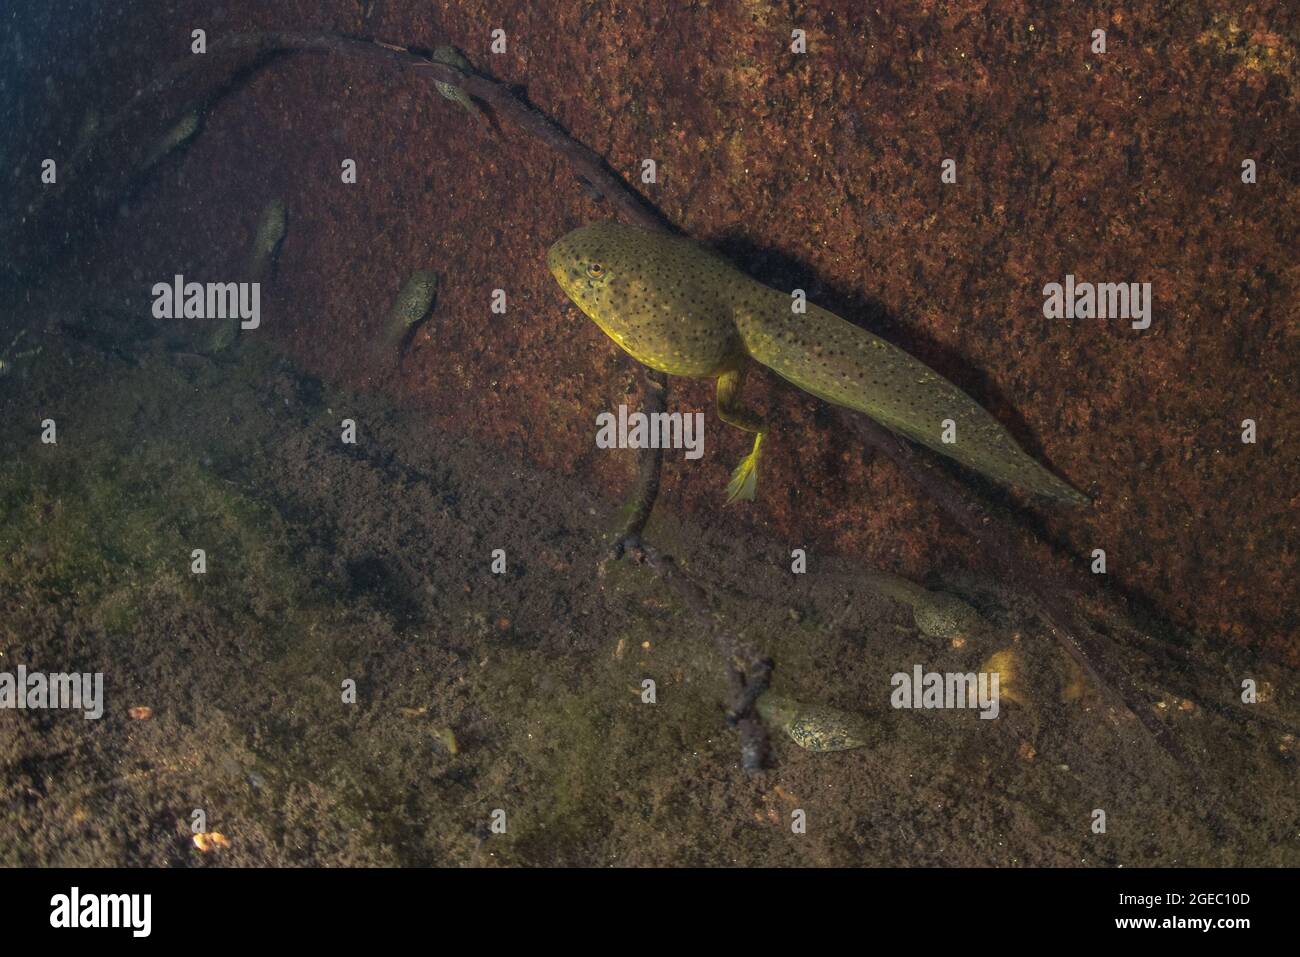 American bullfrog (Lithobates catesbeianus) tadpole resting at the bottom of a California river where this species in introduced and invasive species. Stock Photo